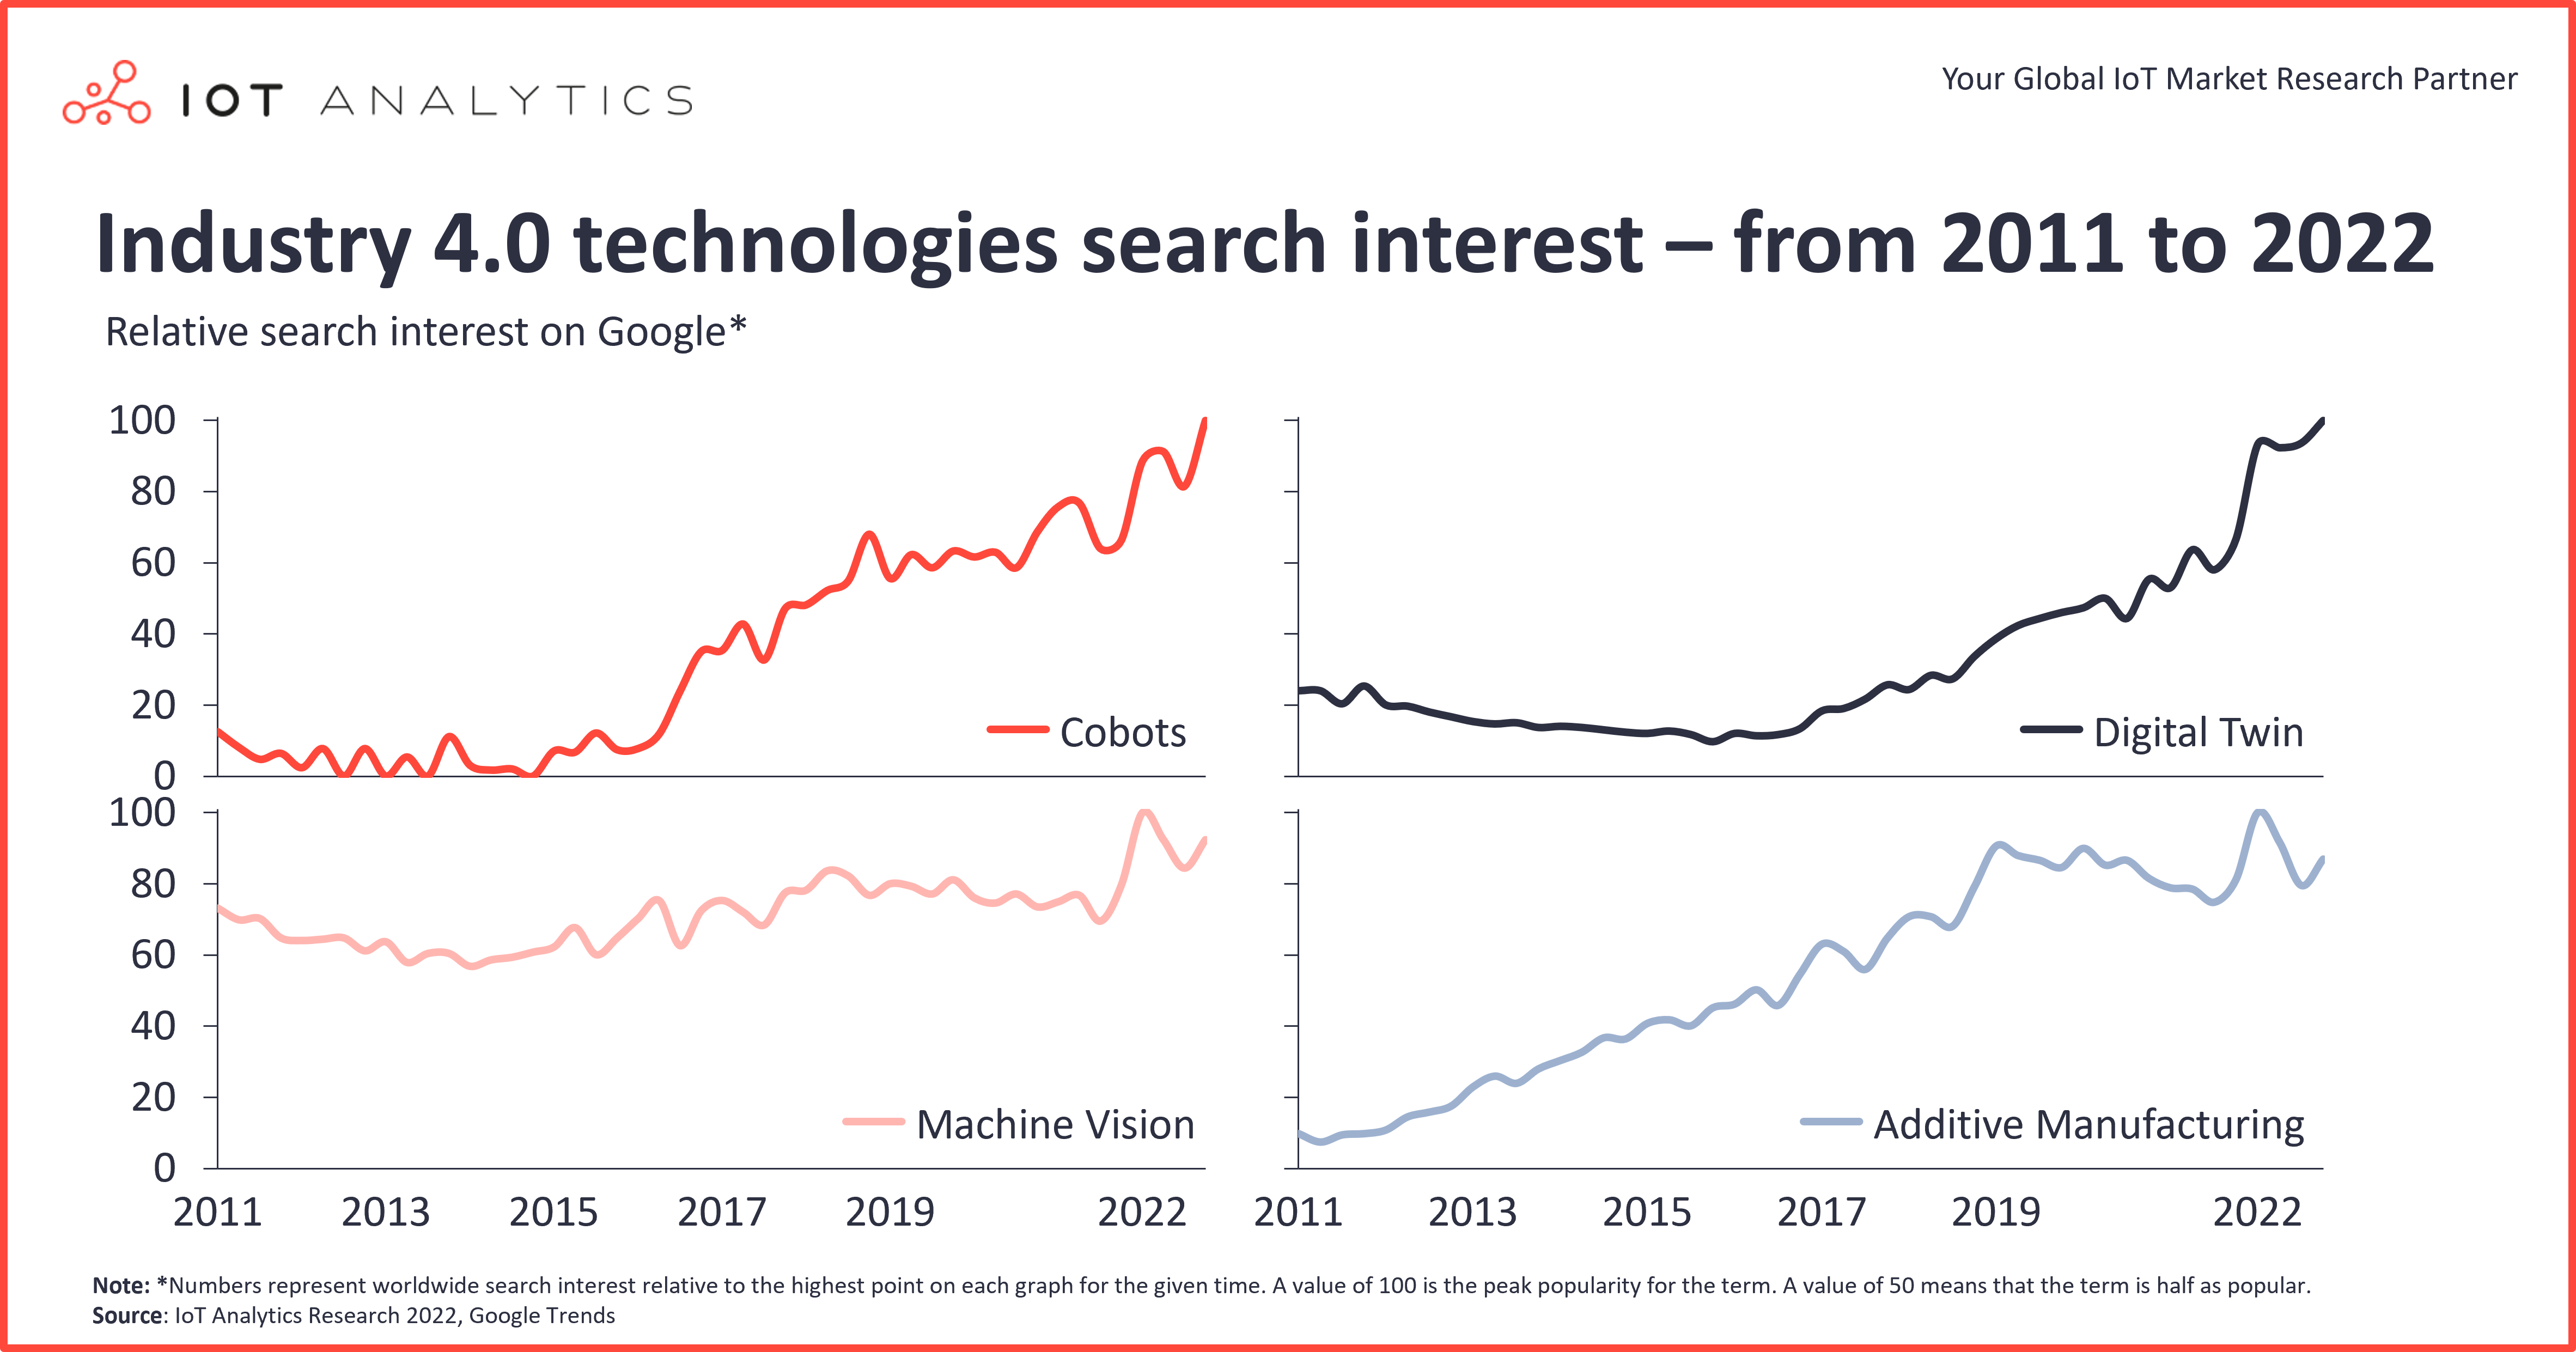 Industry 4.0 technologies search interest from 2011 to 2022